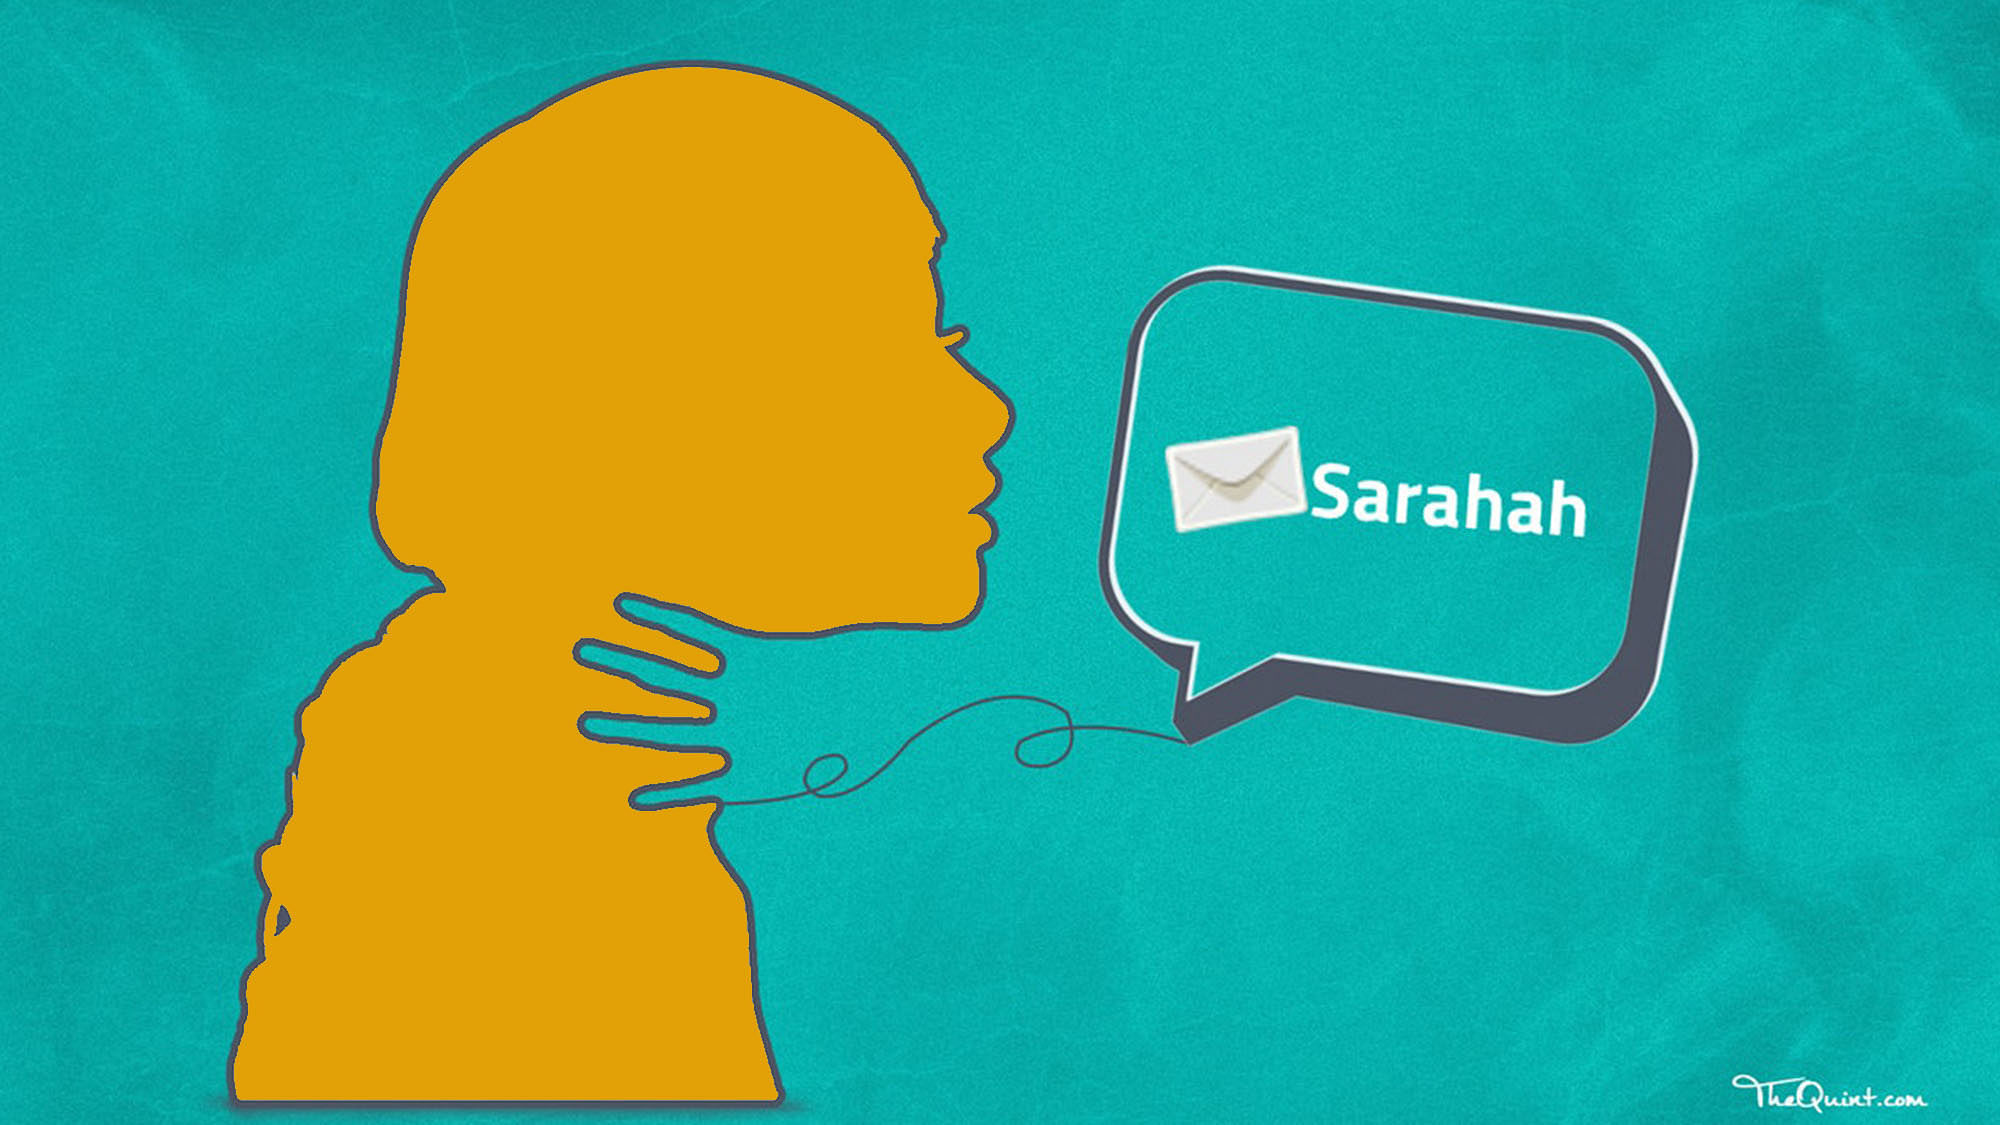 

‘Sarahah’ in Arabic means honesty.